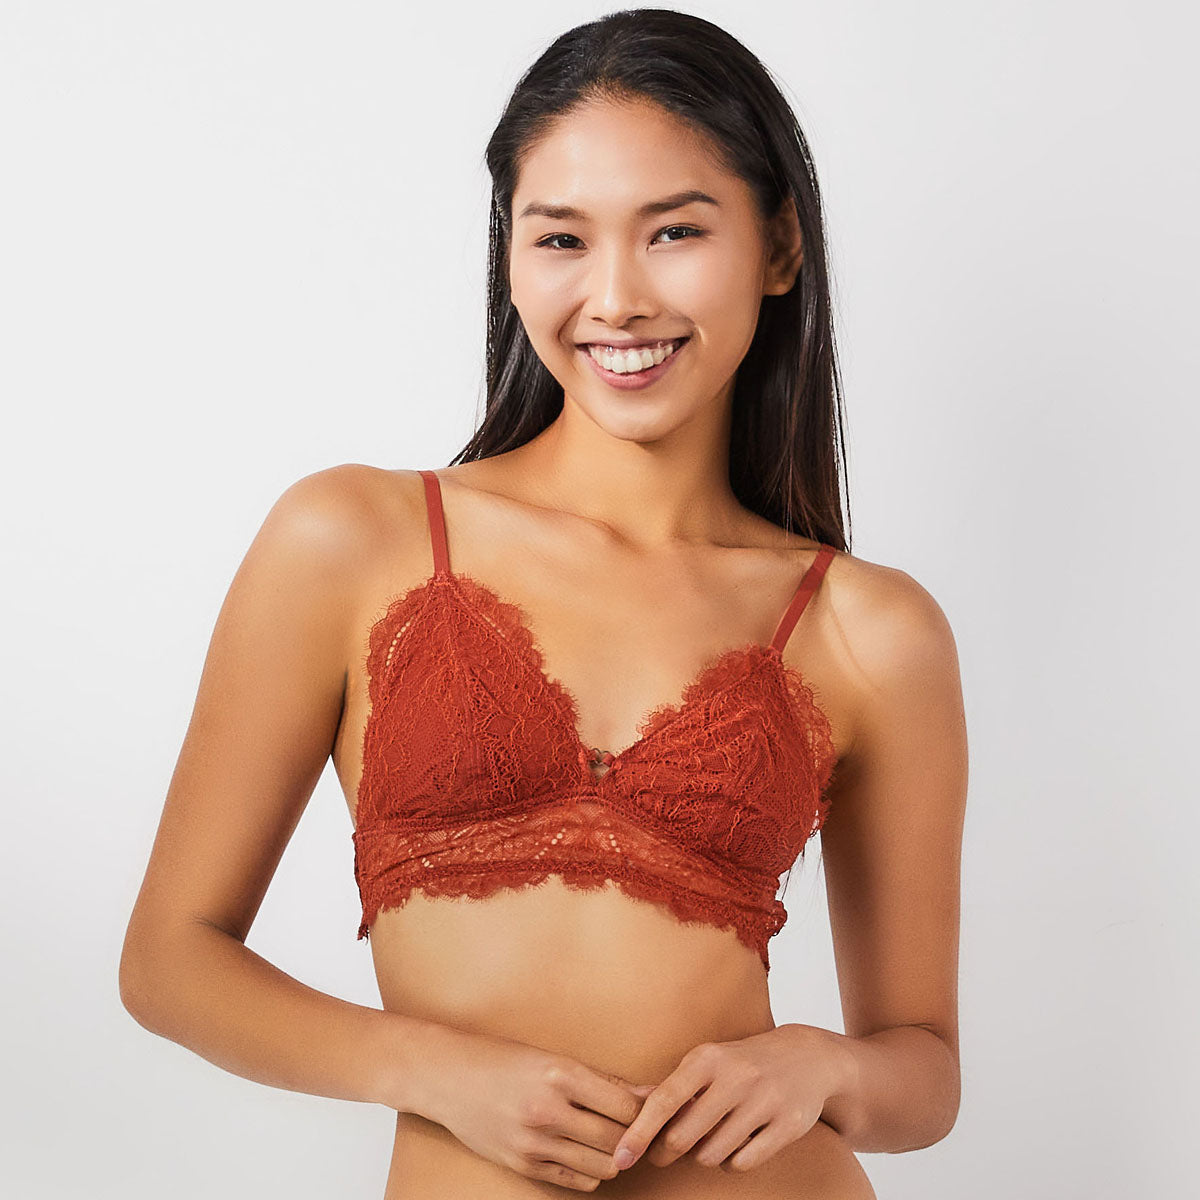 Stylist Unlined Triangle Lace Bra – Her own words